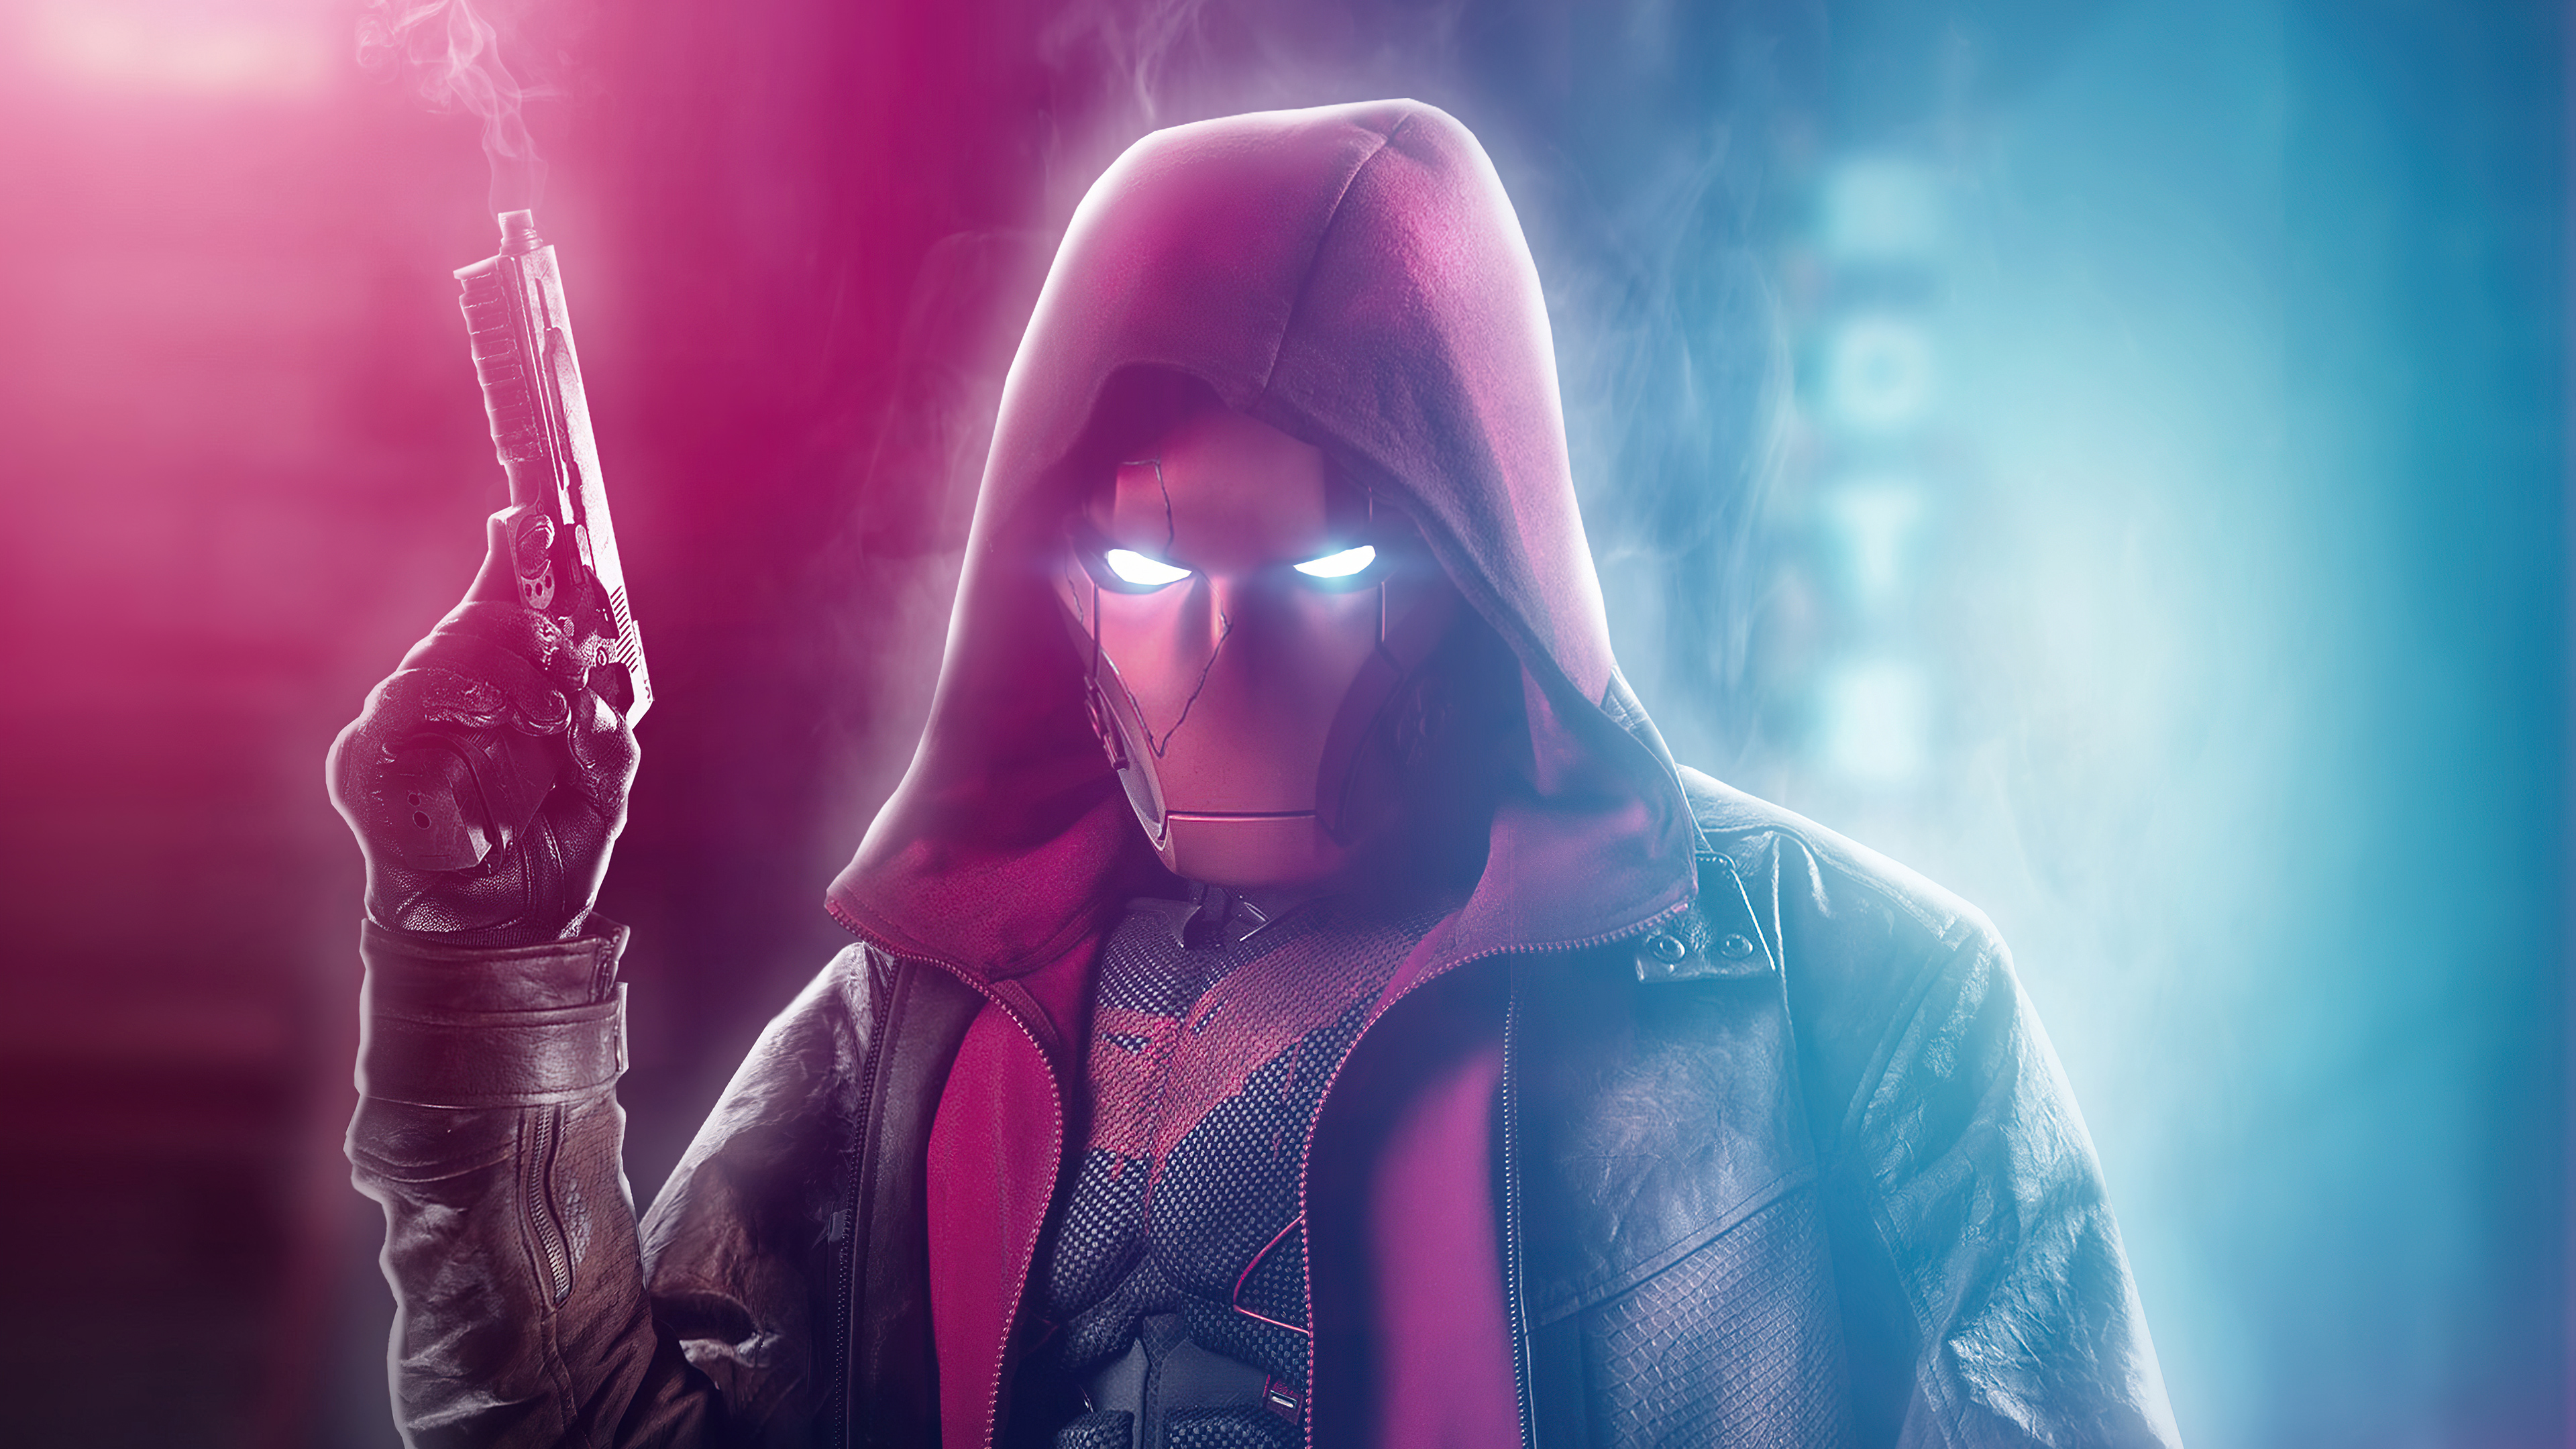 Red Hood Titans Season 3 4k, HD Tv Shows, 4k Wallpaper, Image, Background, Photo and Picture